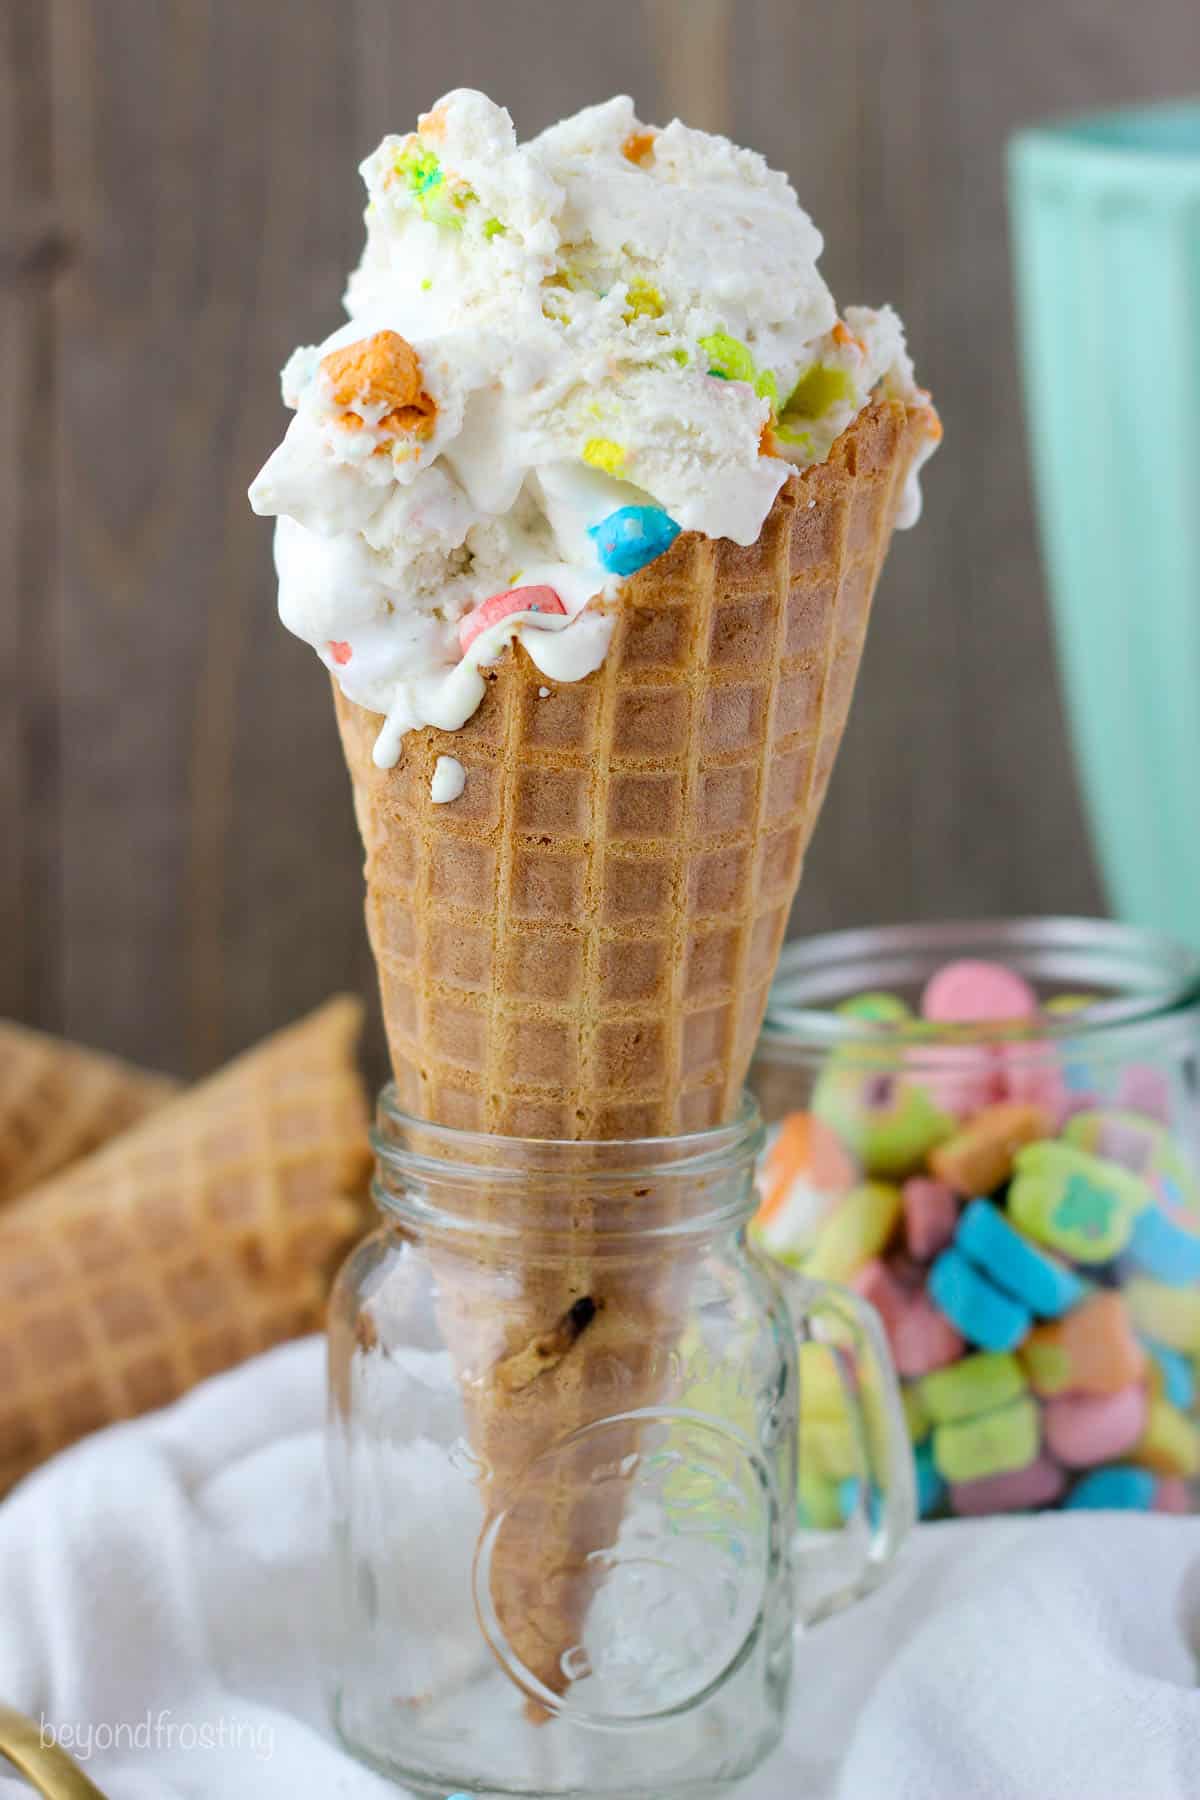 A scoop of Lucky charms ice cream in a waffle cone